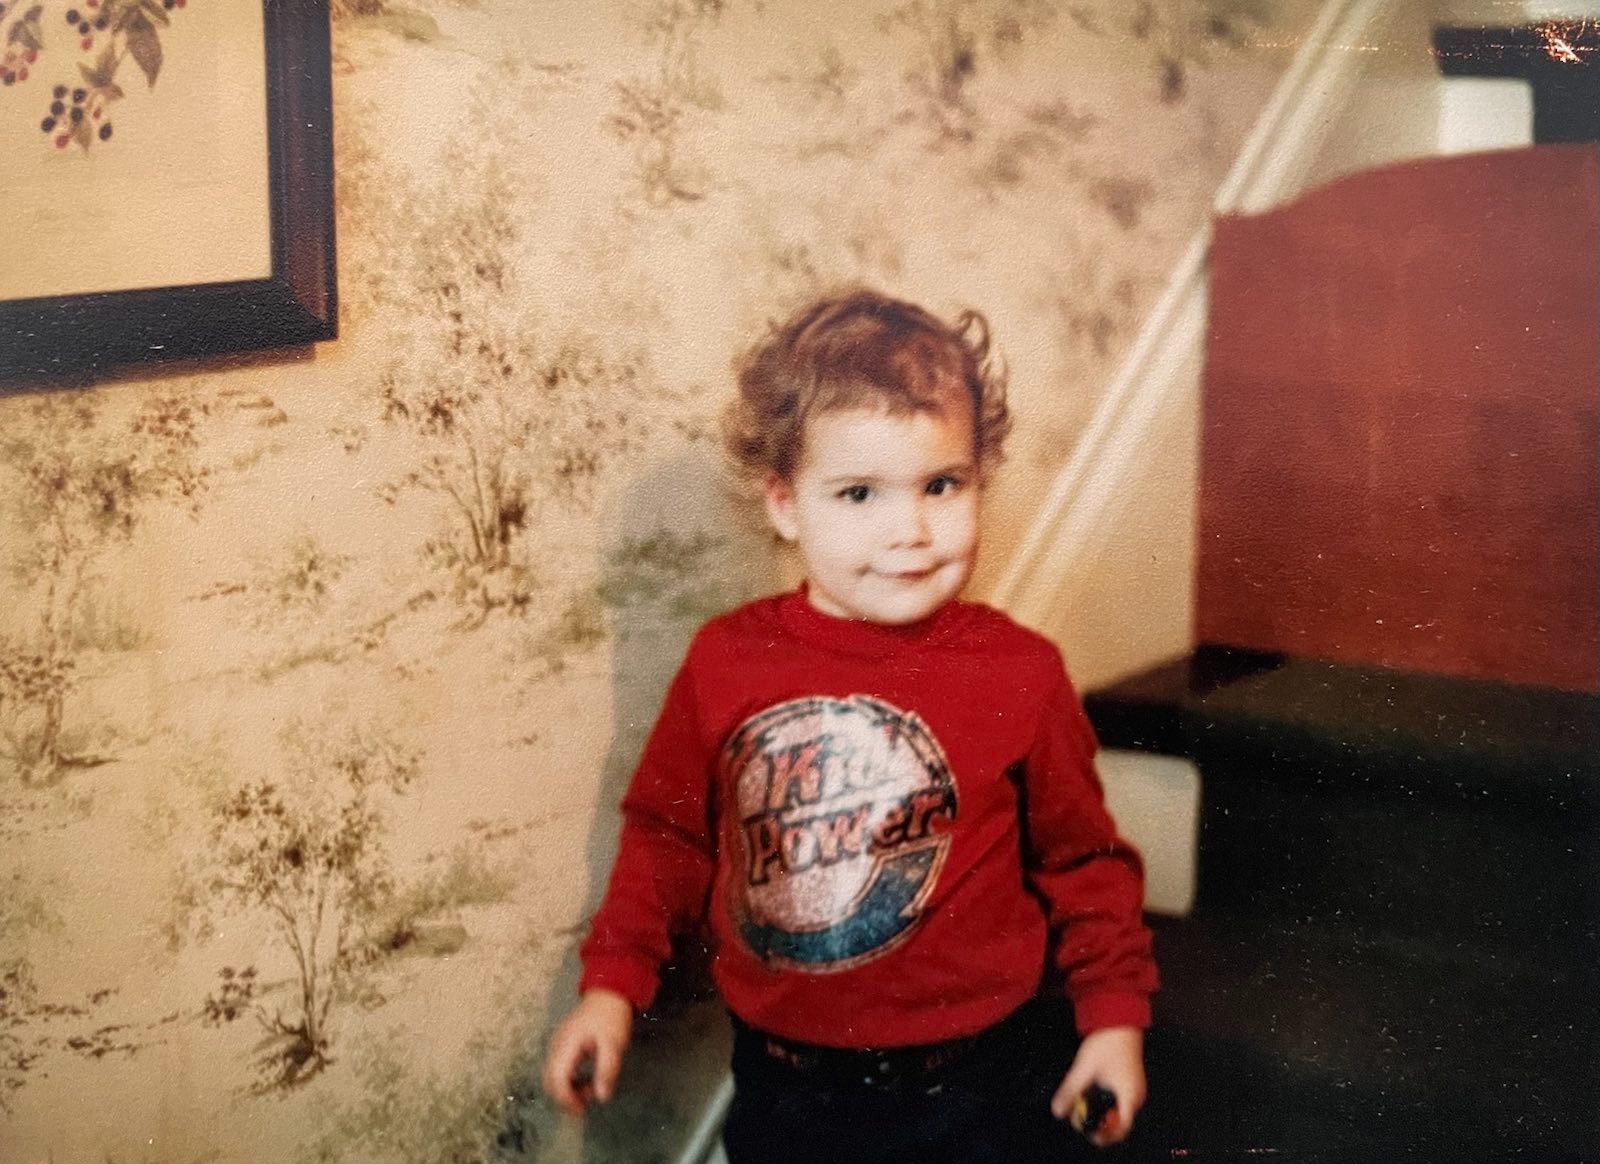 itty bitty Kristen with her baby curls wearing her favorite Kid Power sweatshirt long before she had any idea she was autistic